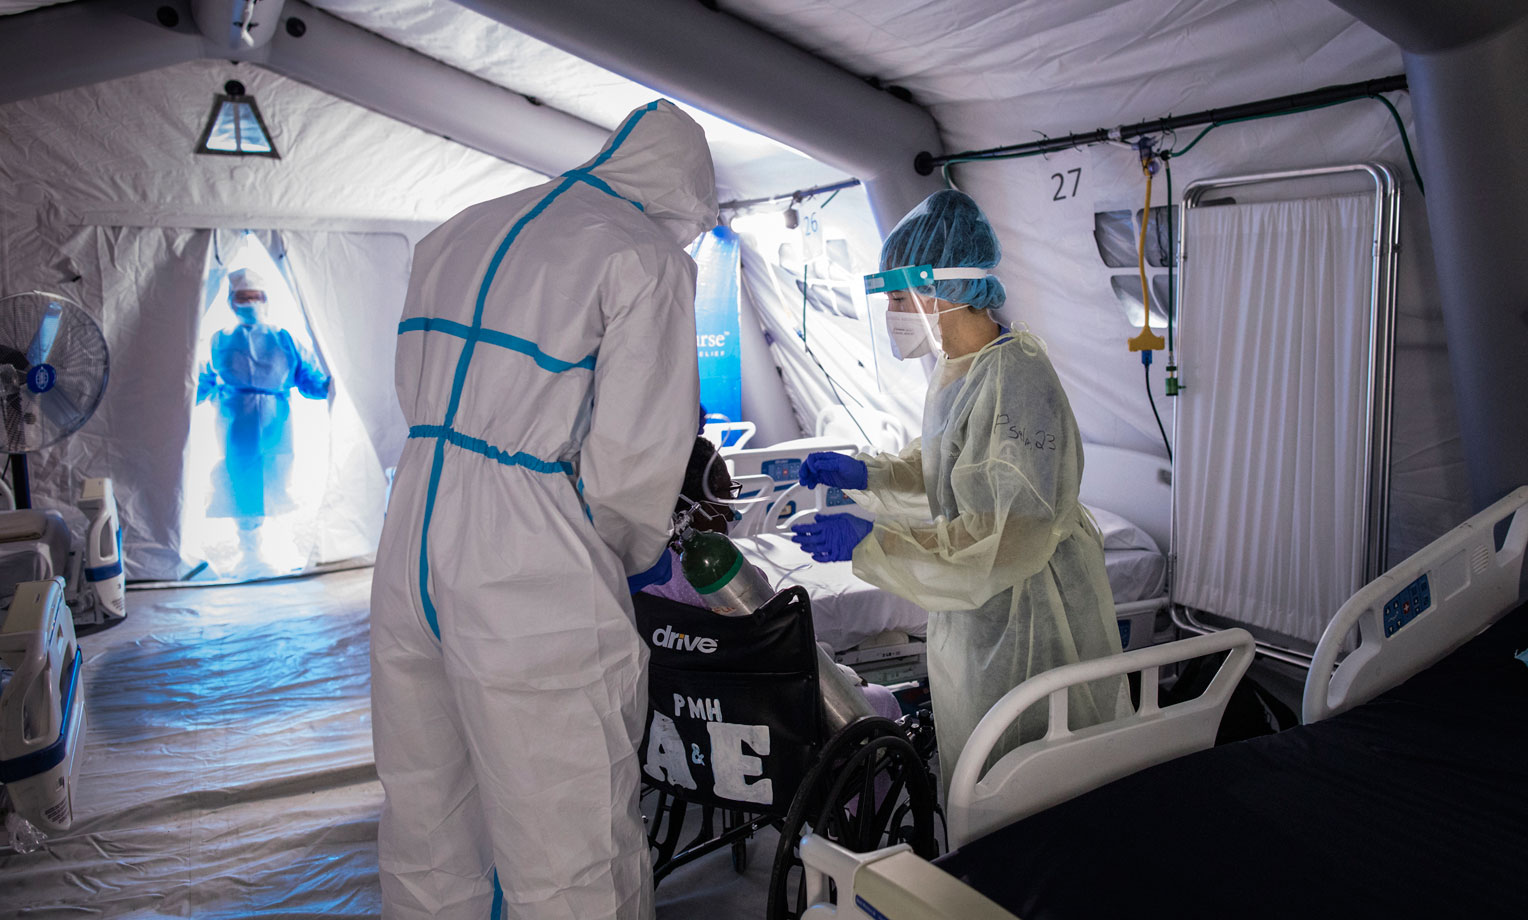 Emergency Field Hospital Cares for COVID-19 Patients in the Bahamas